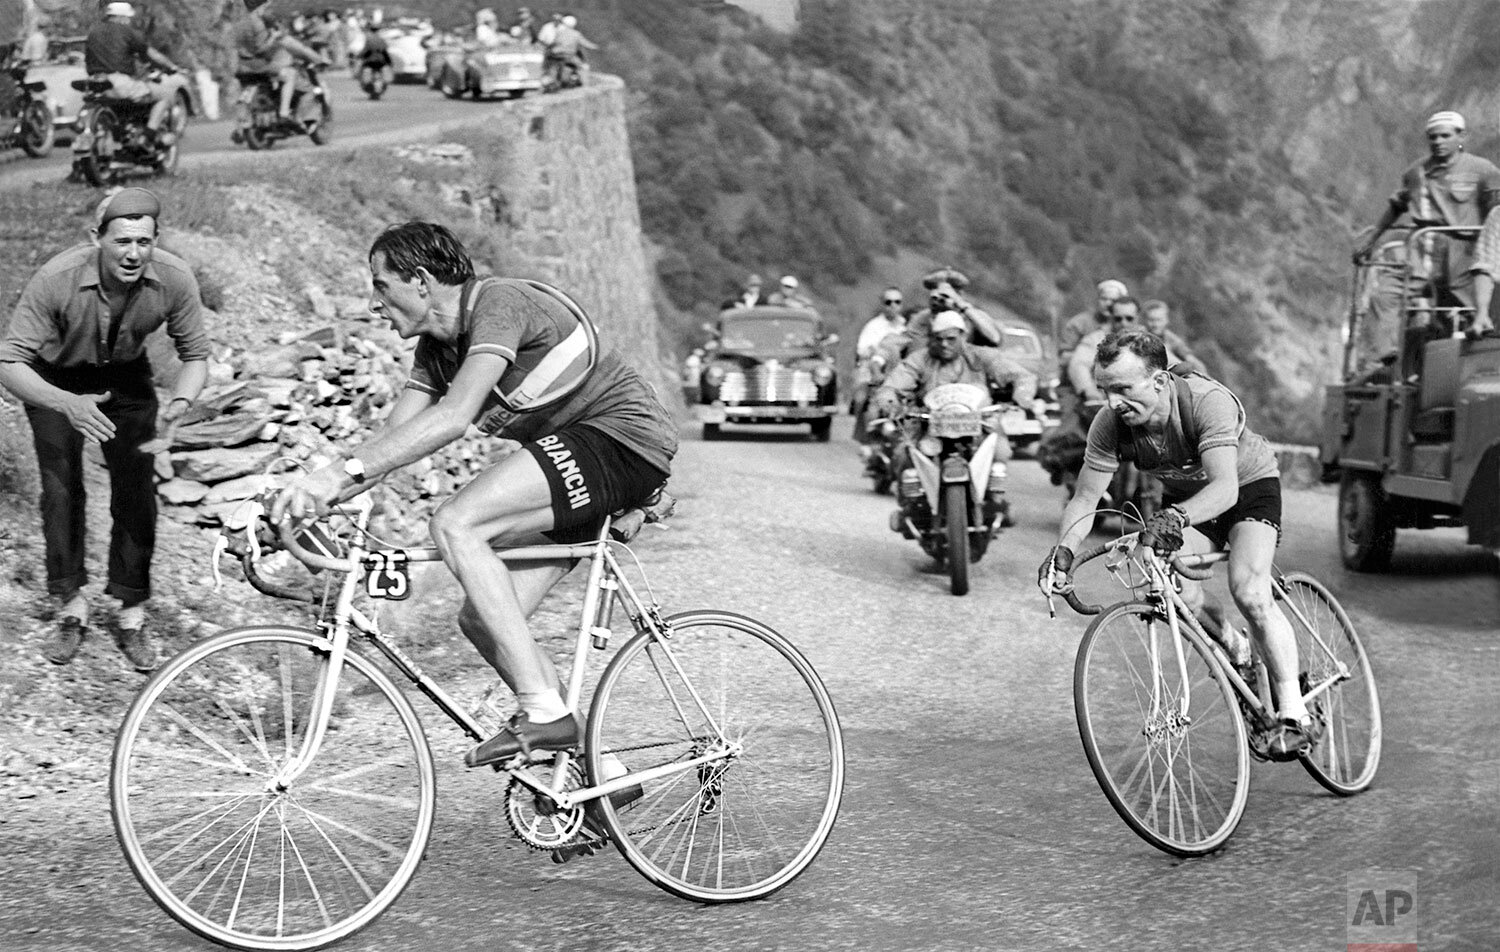  Fausto Coppi of Italy leads the pack ahead of Jean Robic of France on his way to win the 10th stage of the Tour de France cycling race from Lausanne to L'Alpe d'Huez, July 4, 1952. Coppi later won the Tour de France 1952. (AP Photo)   